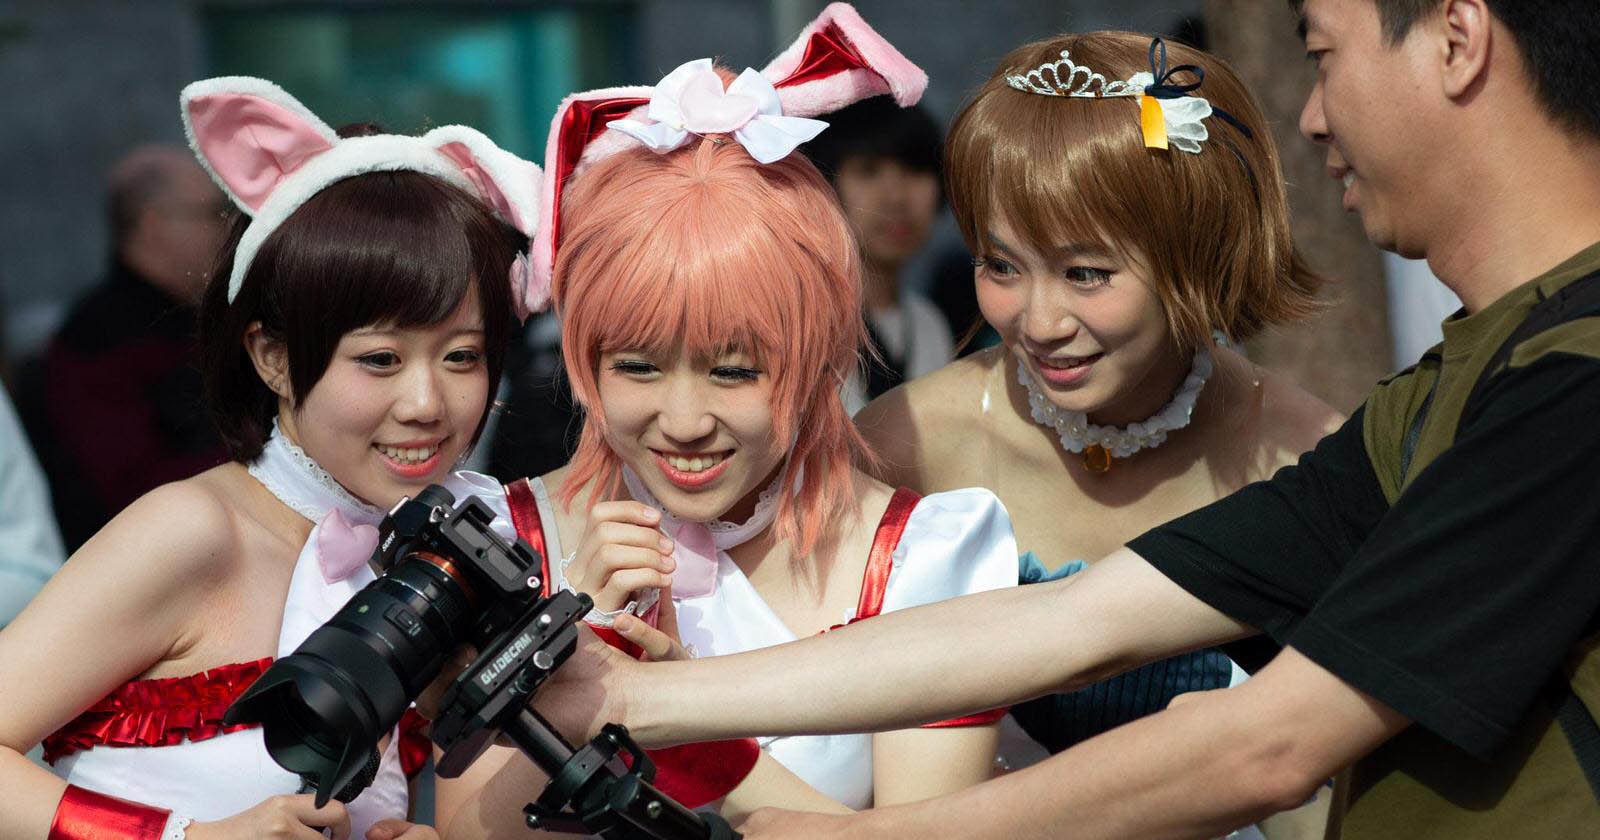 Anime Conventions: A Great Place to Build Confidence as a Photographer